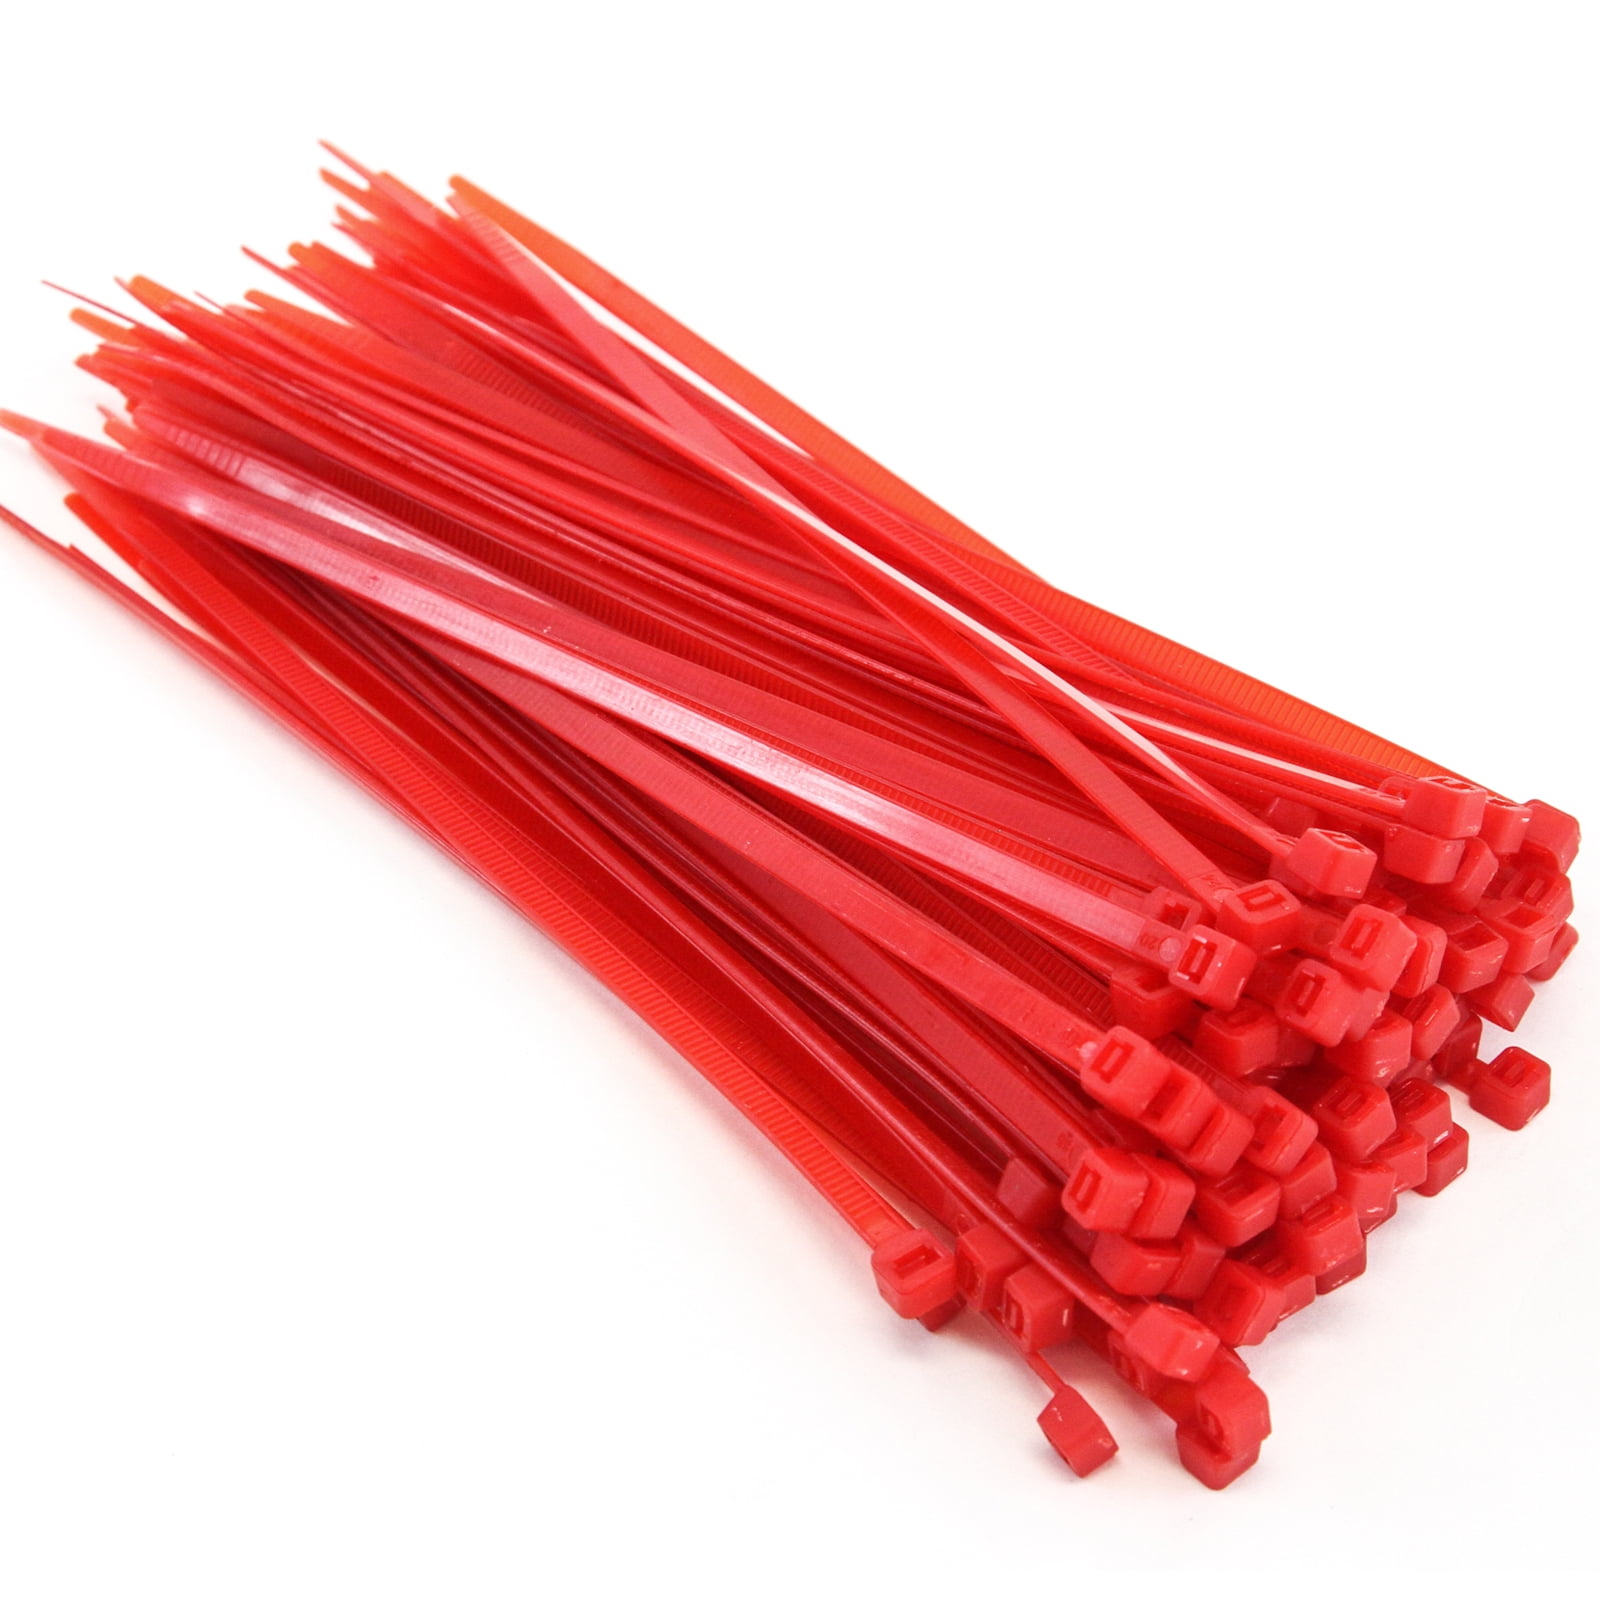 100 NAPA 14" 50 LBS NYLON WIRE CABLE ZIP TIES RED 